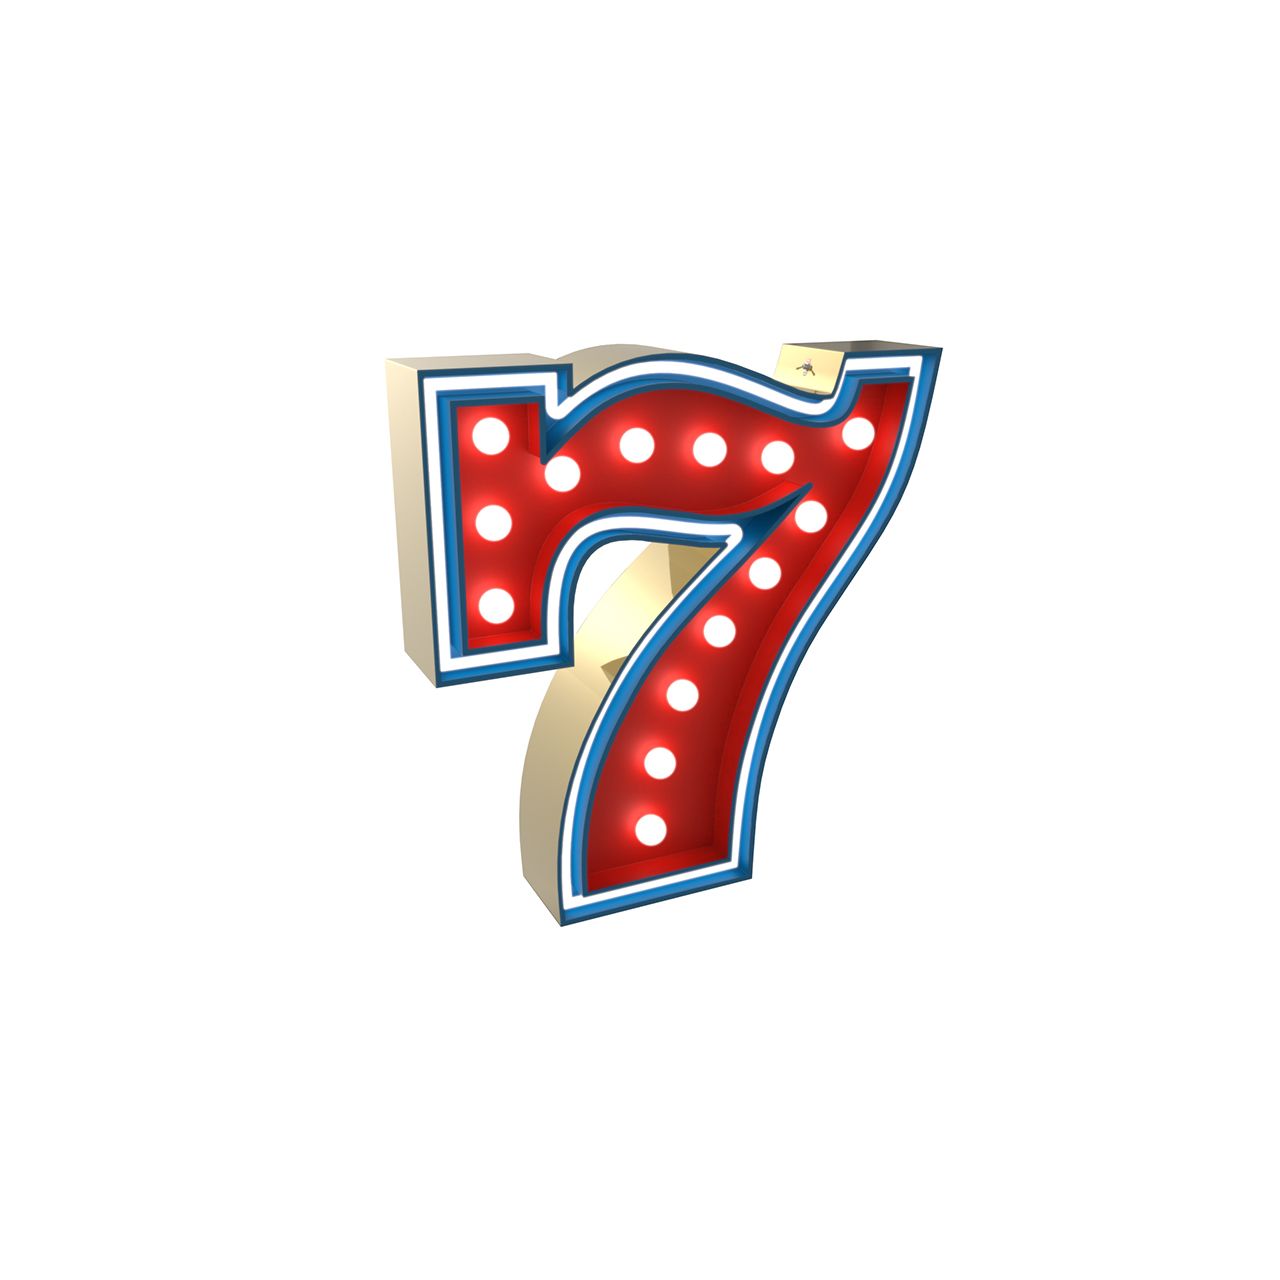 NUMBER 7 GRAPHIC LAMP